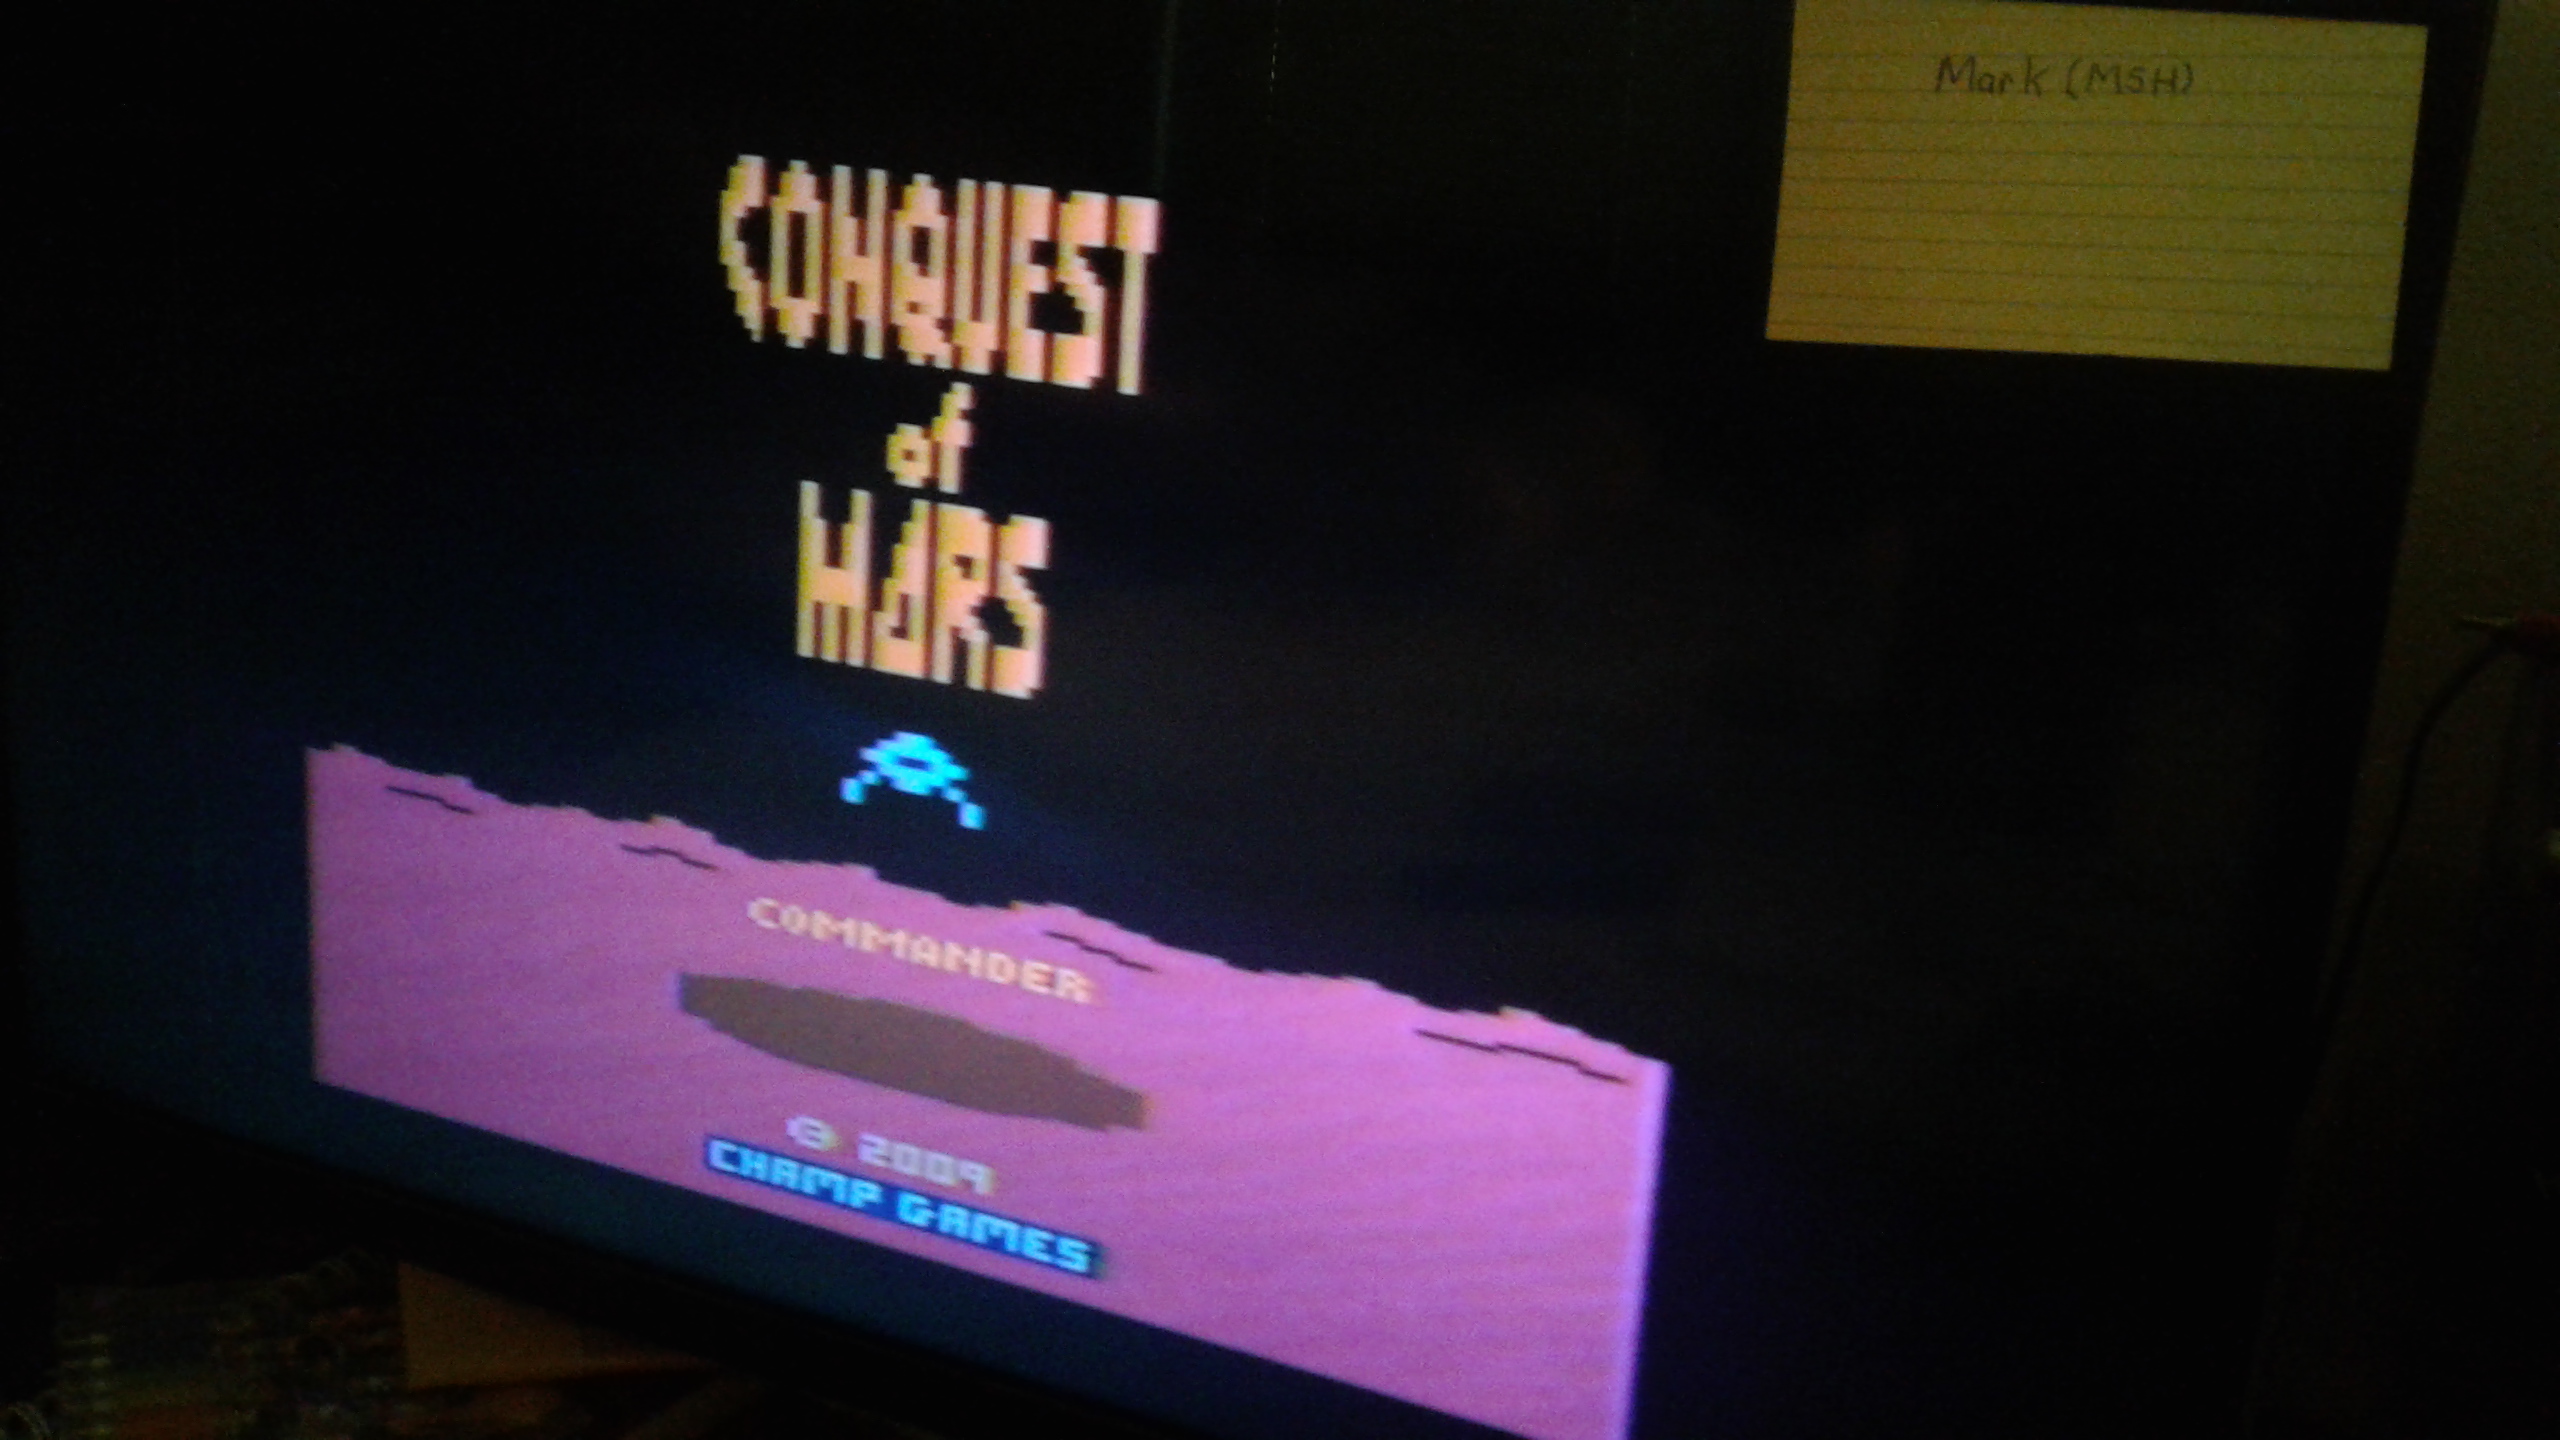 Mark: Conquest of Mars: Commander (Atari 2600 Expert/A) 18,280 points on 2019-03-06 01:43:26